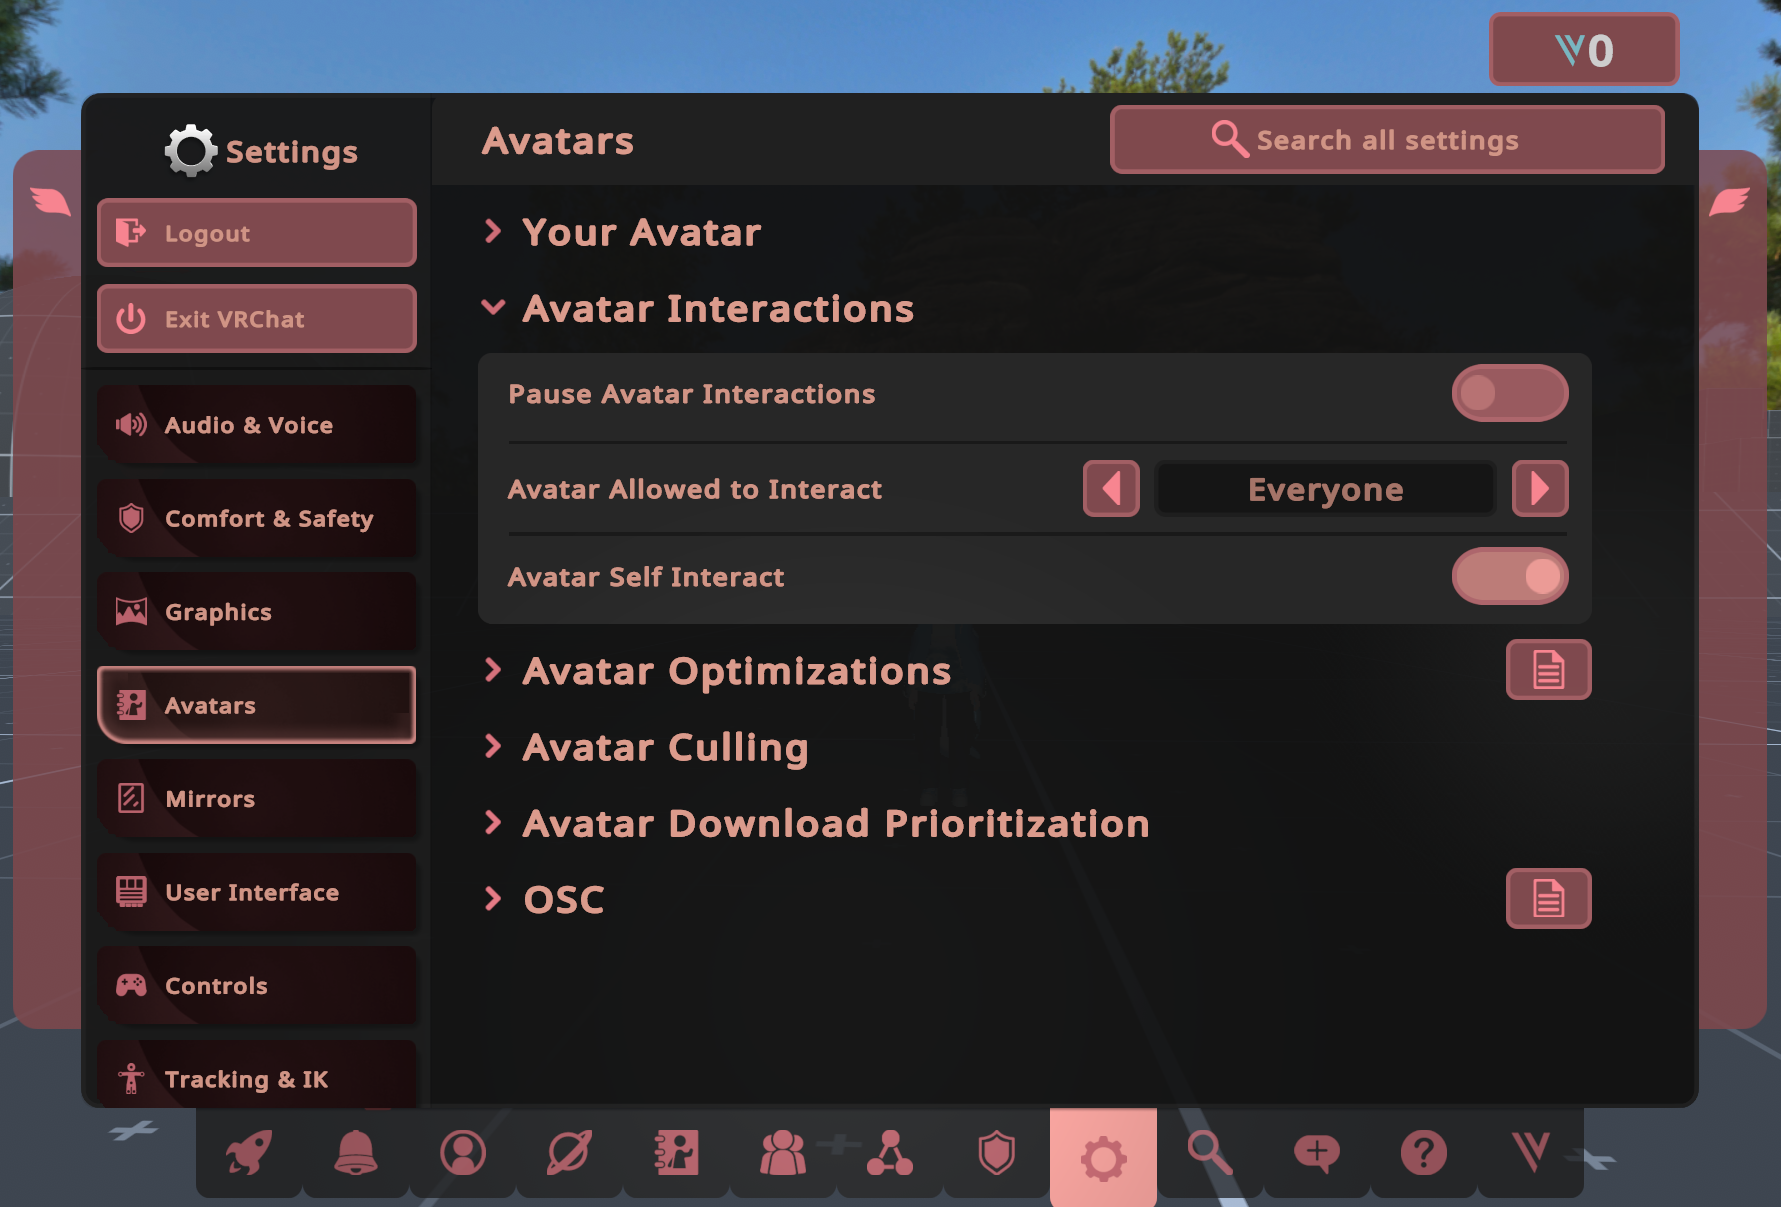 The Settings page for Avatar Interactions. Note how Avatar Allowed to Interact is set to Everyone, showing that everyone can interact with your avatar.